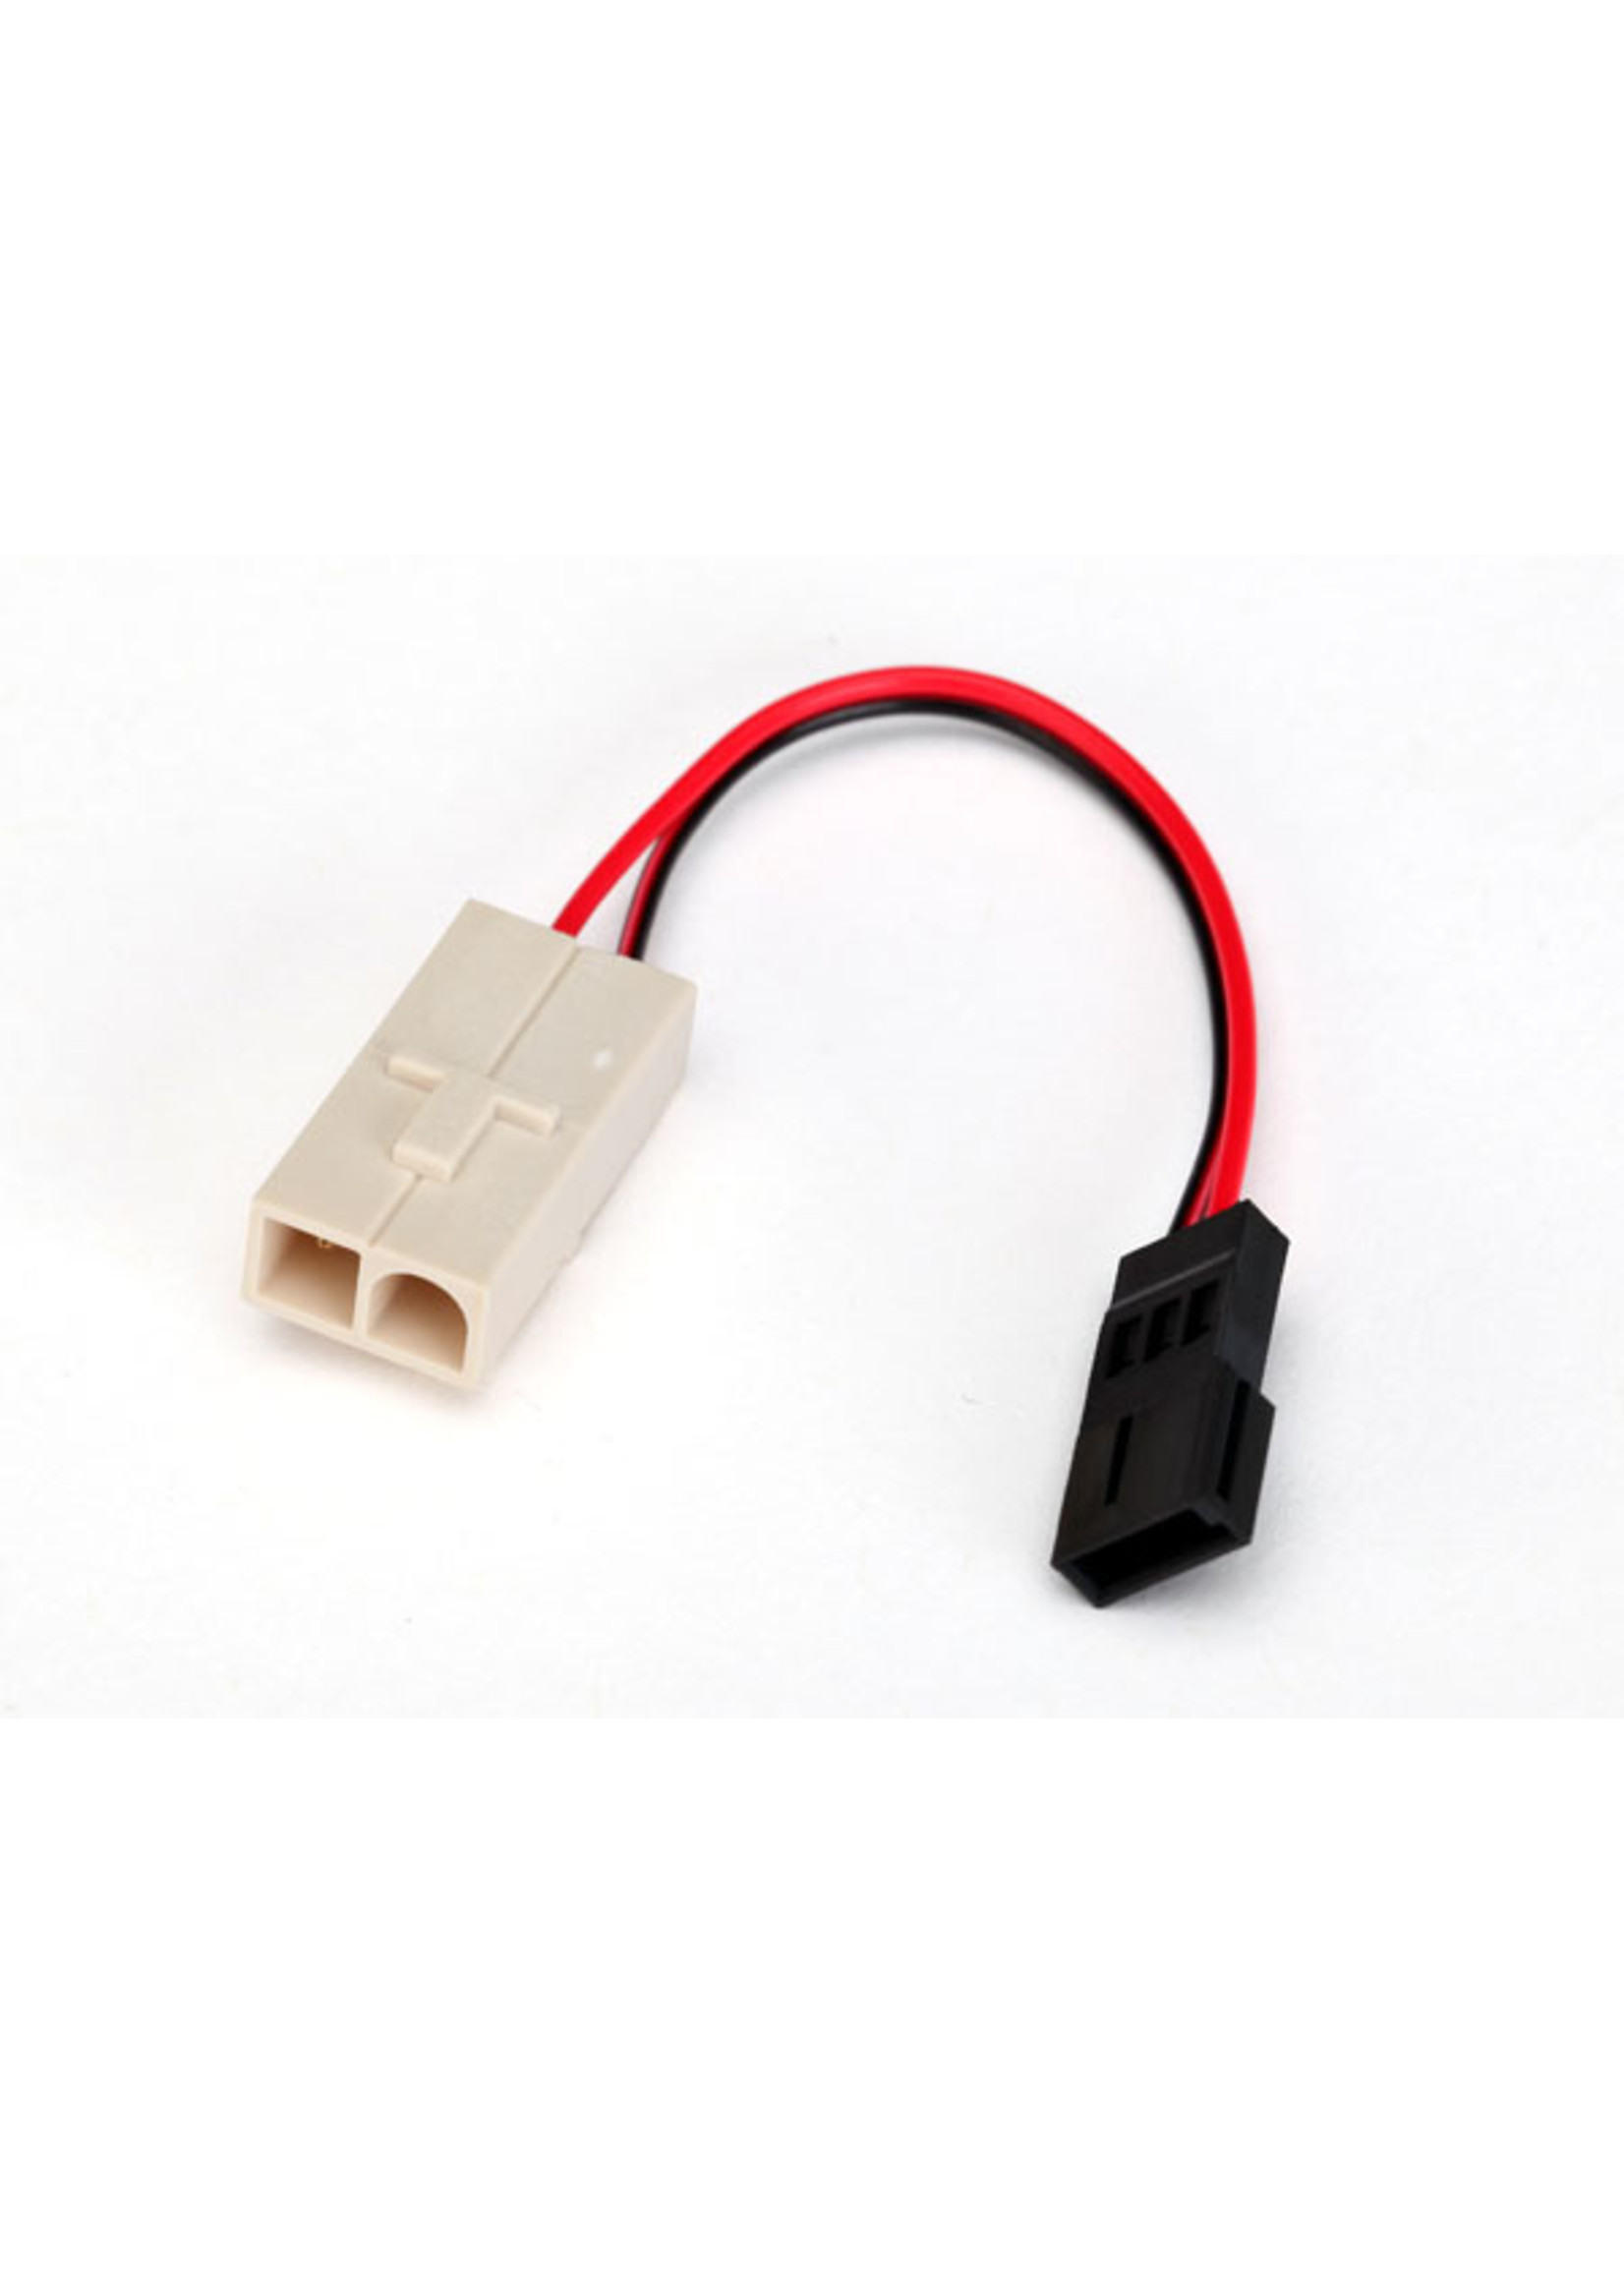 Traxxas TRA3028 Traxxas Adapter, Molex to Traxxas receiver battery pack (for charging) (1)